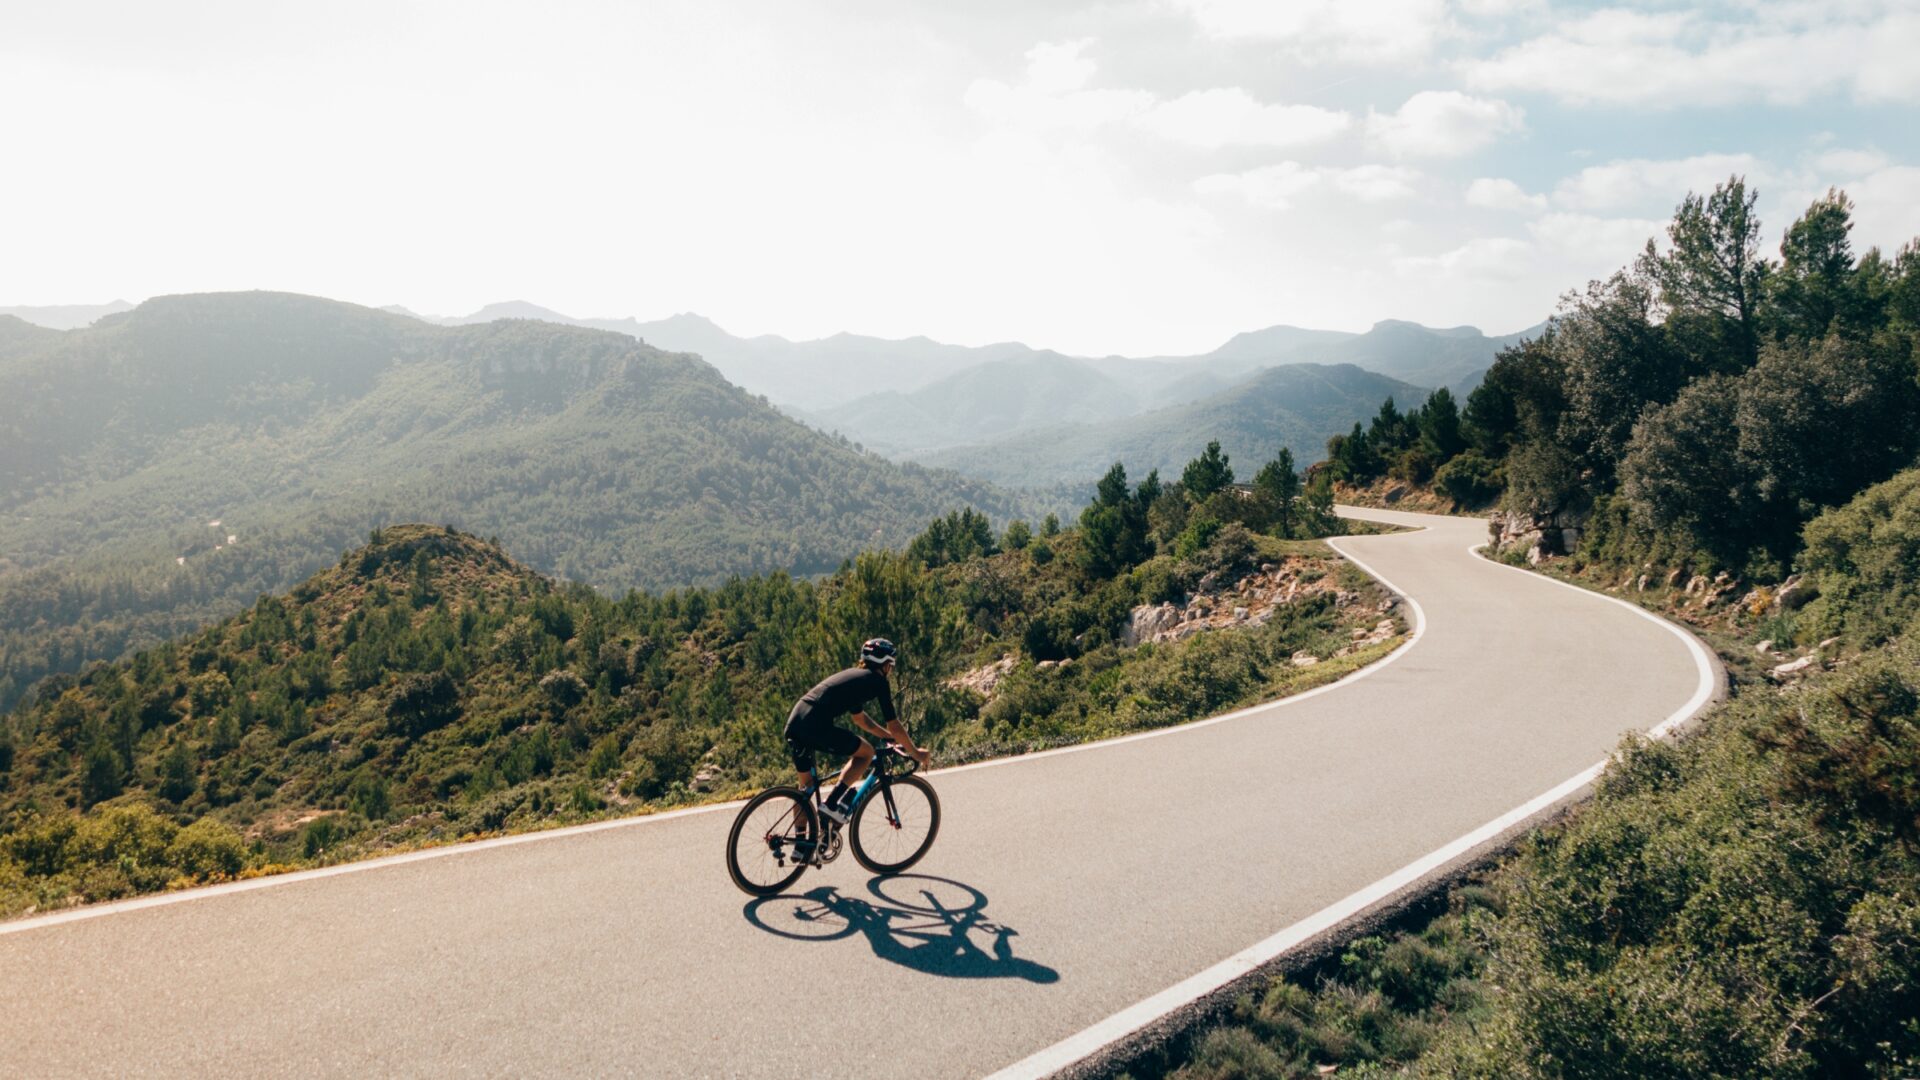 A cyclist rides along an undulating mountain road on a bright day